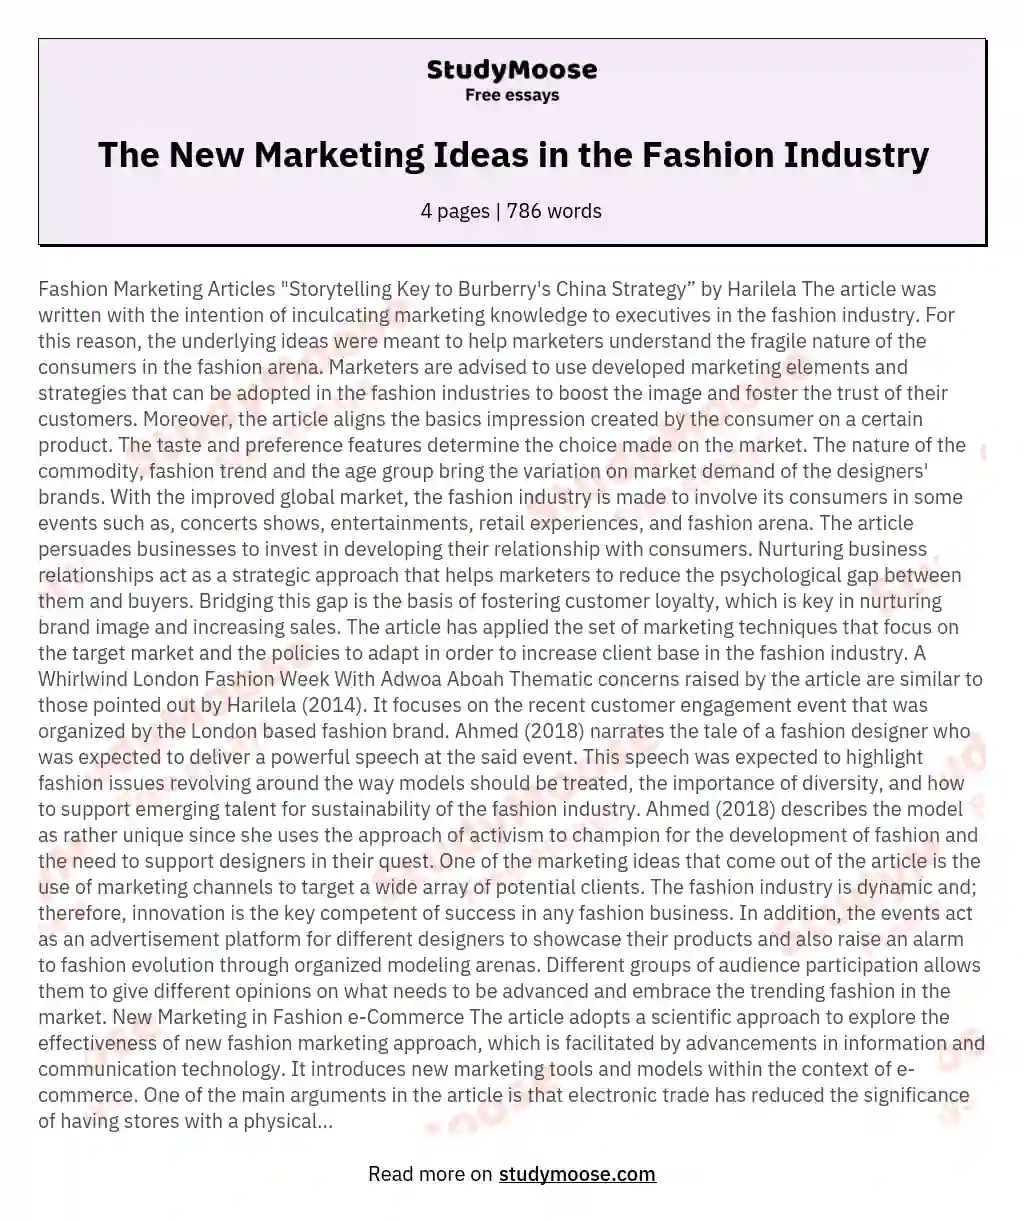 The New Marketing Ideas in the Fashion Industry essay